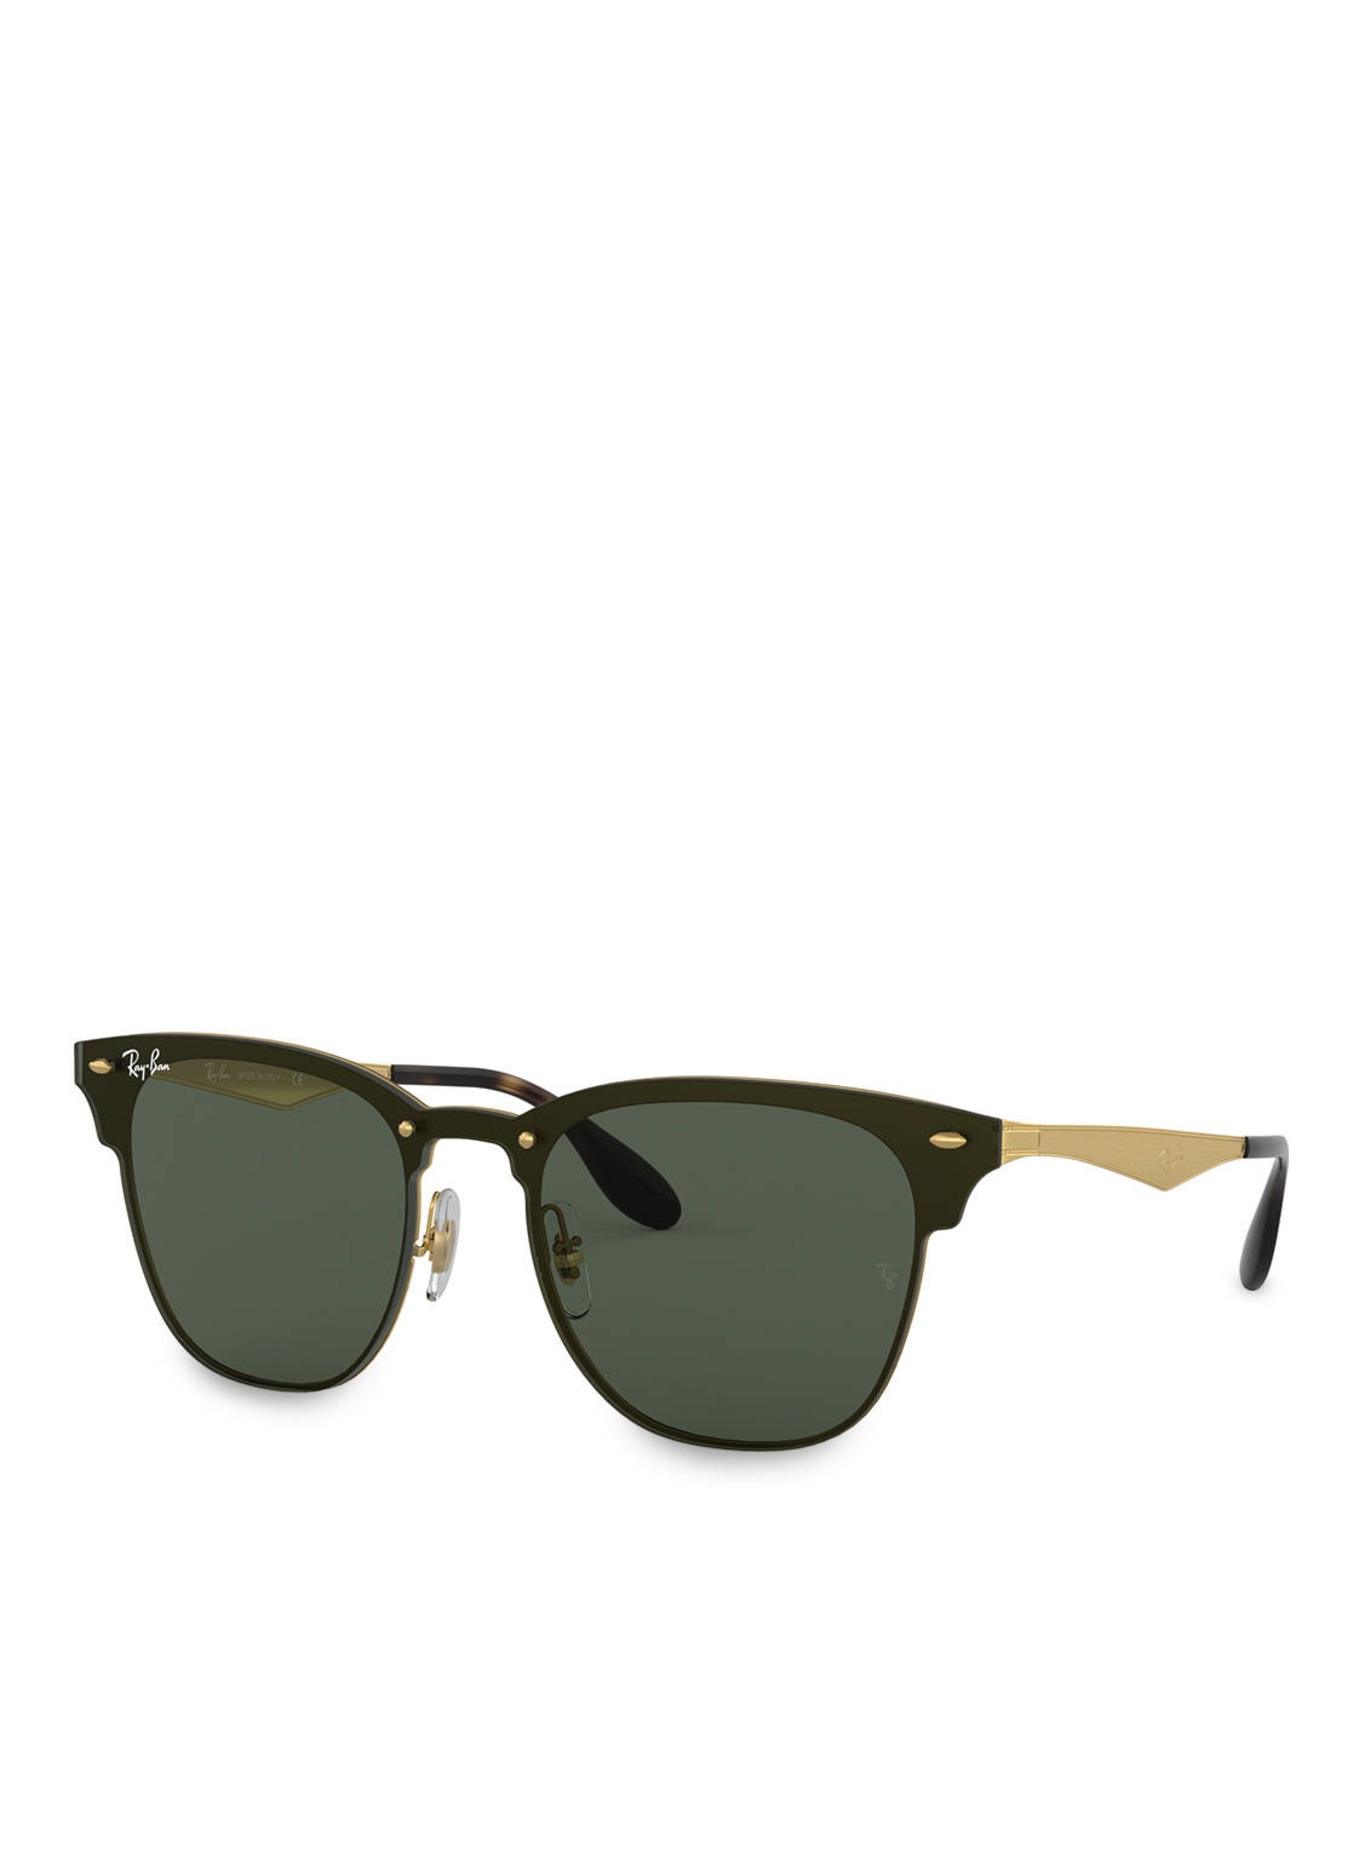 Ray-Ban Sunglasses RB3576N BLAZE CLUBMASTER, Color: 043/71 - BLACK/ GREEN (Image 1)